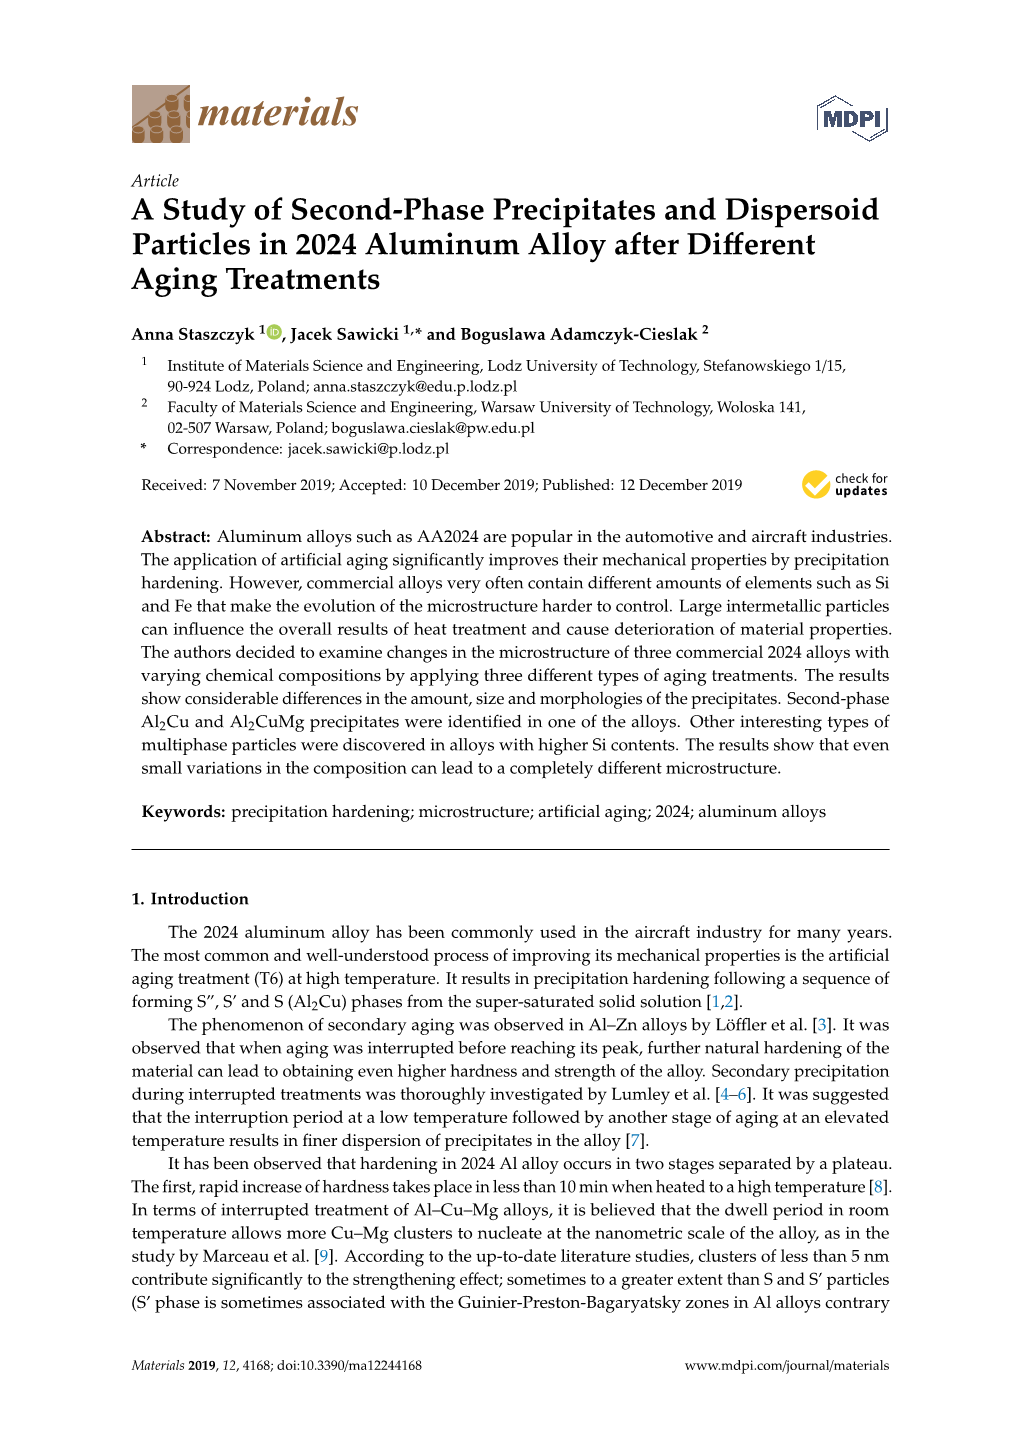 A Study of Second-Phase Precipitates and Dispersoid Particles in 2024 Aluminum Alloy After Diﬀerent Aging Treatments